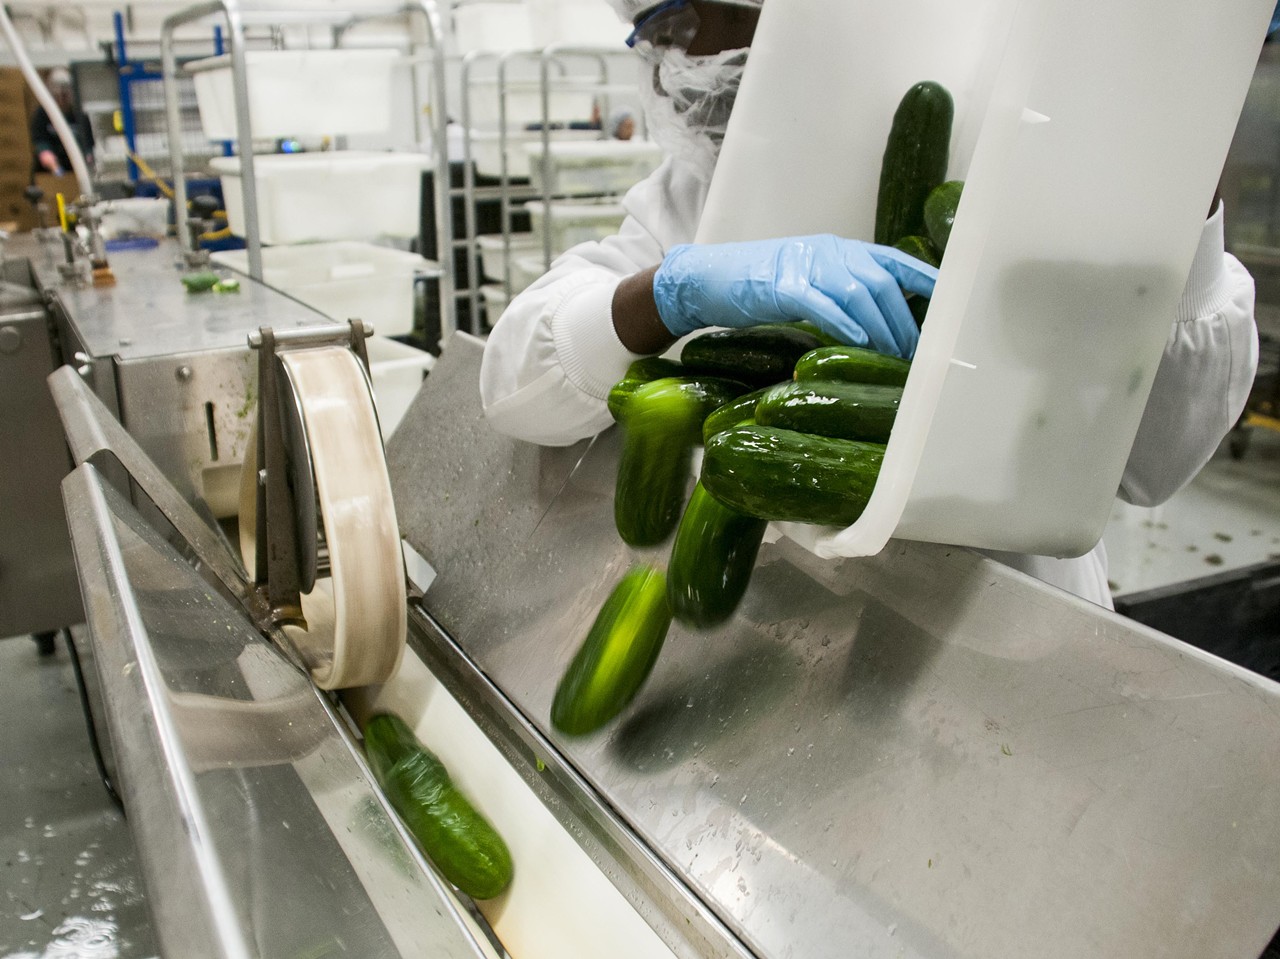 He then drops them in the slicing machine, a roughly 20-foot piece of equipment that sucks cucumbers out of the troth with spinning belts. The produce shoots through a slicer, a long tube, and ....